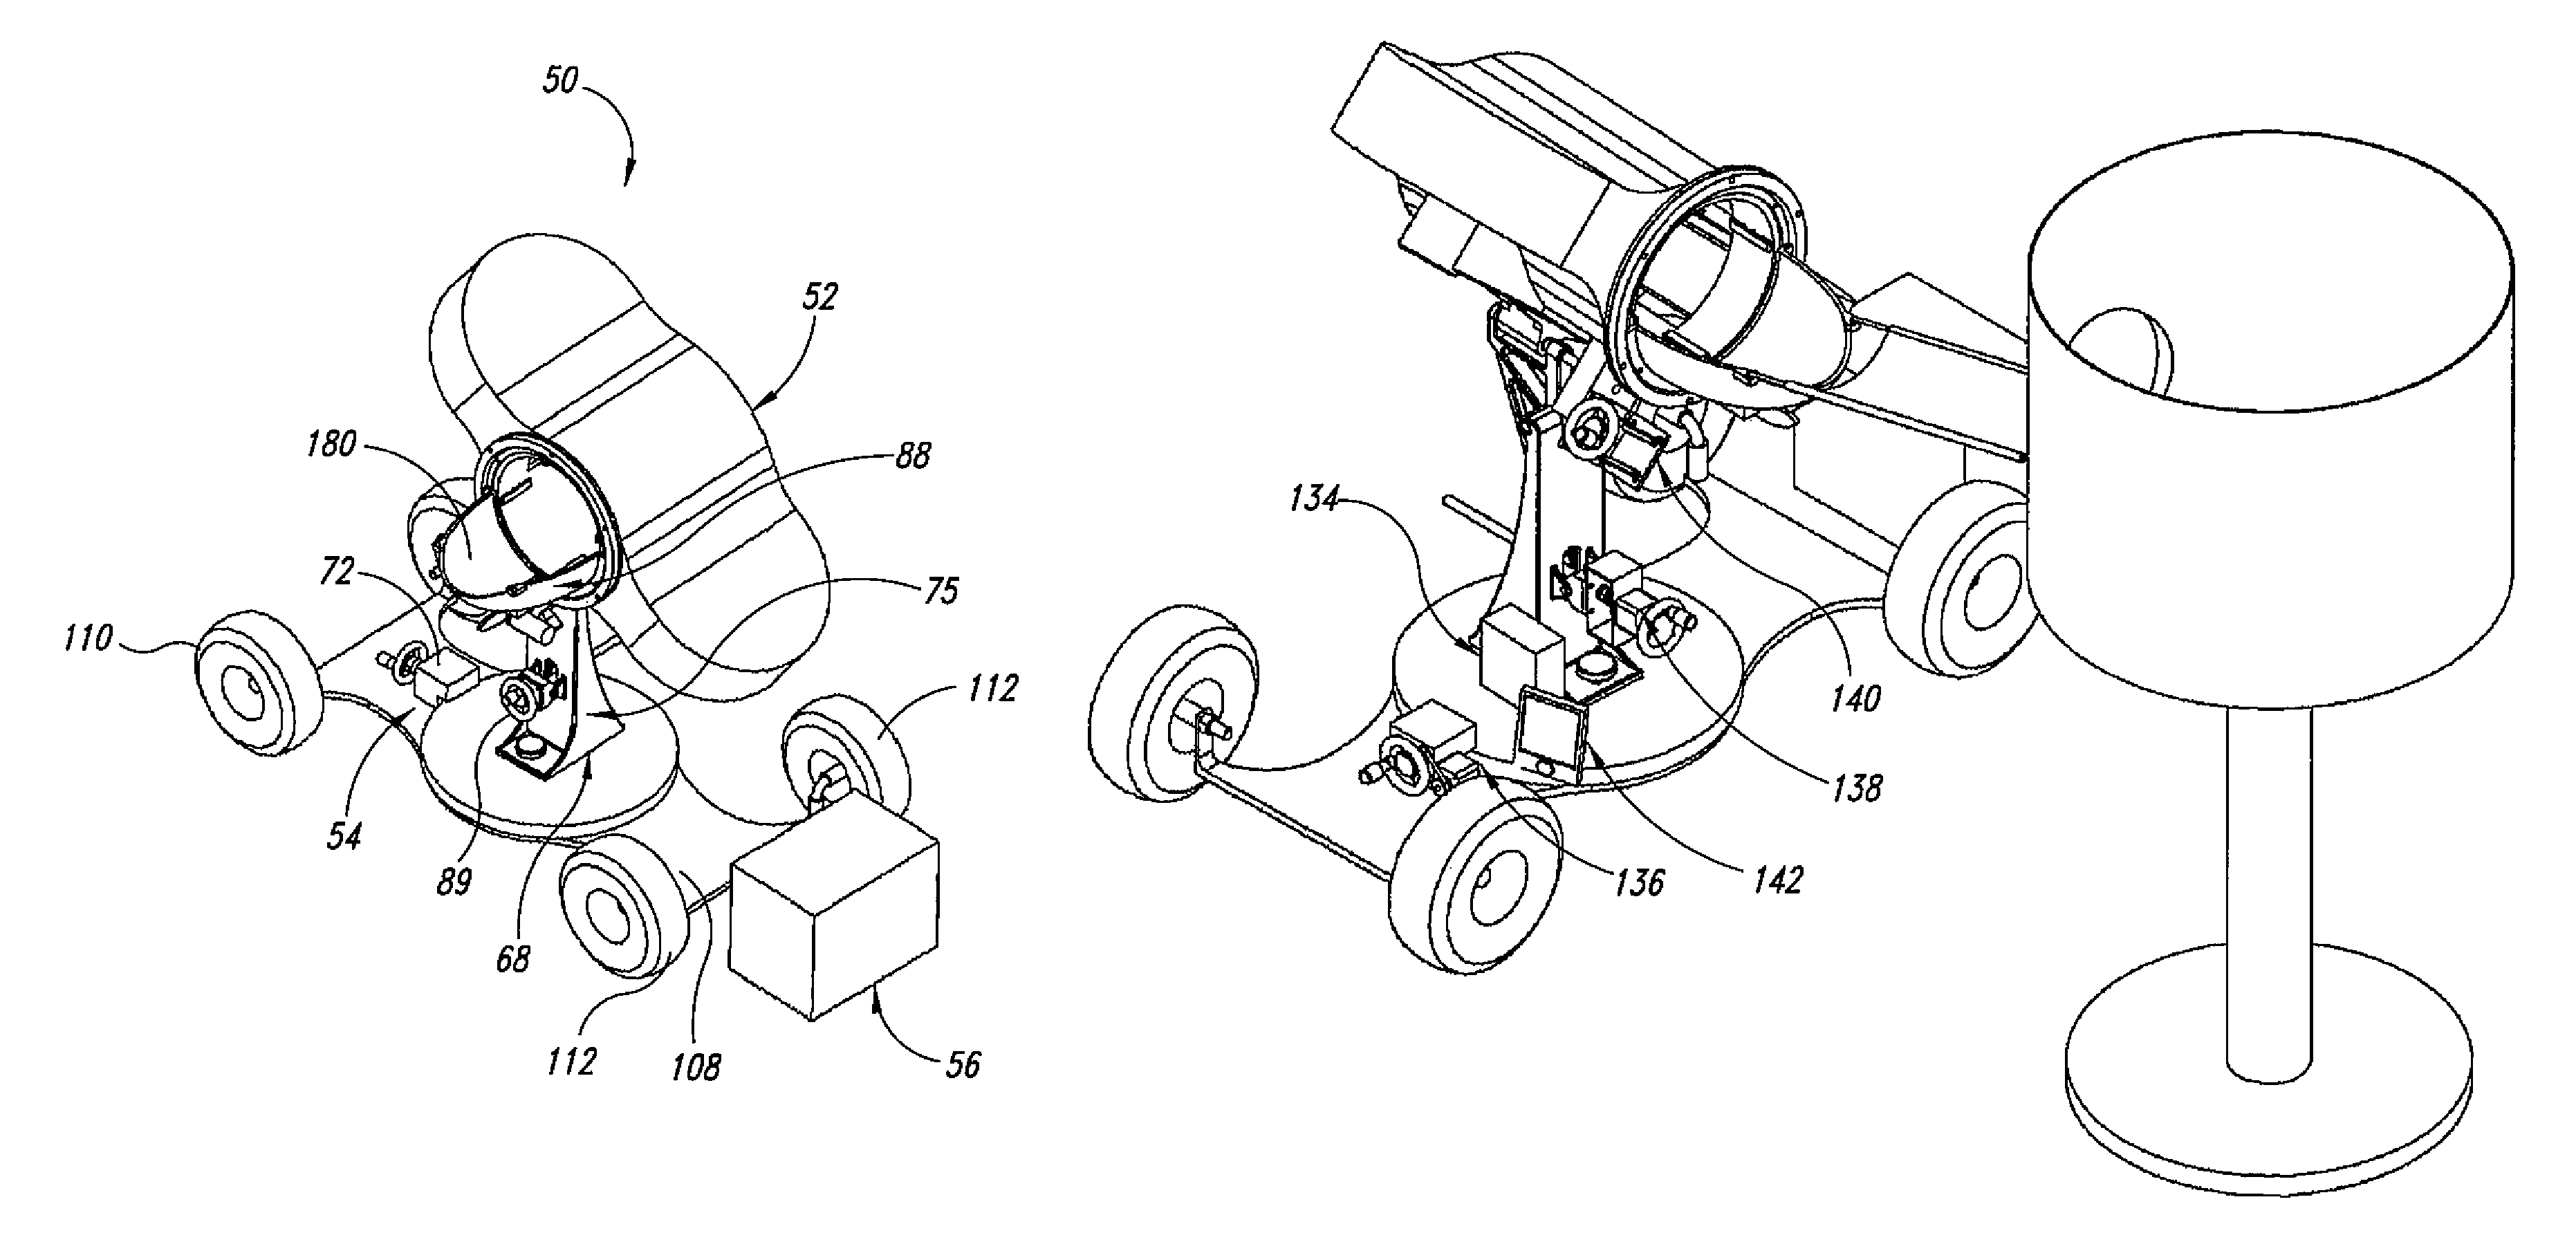 Soccer ball delivery system and method